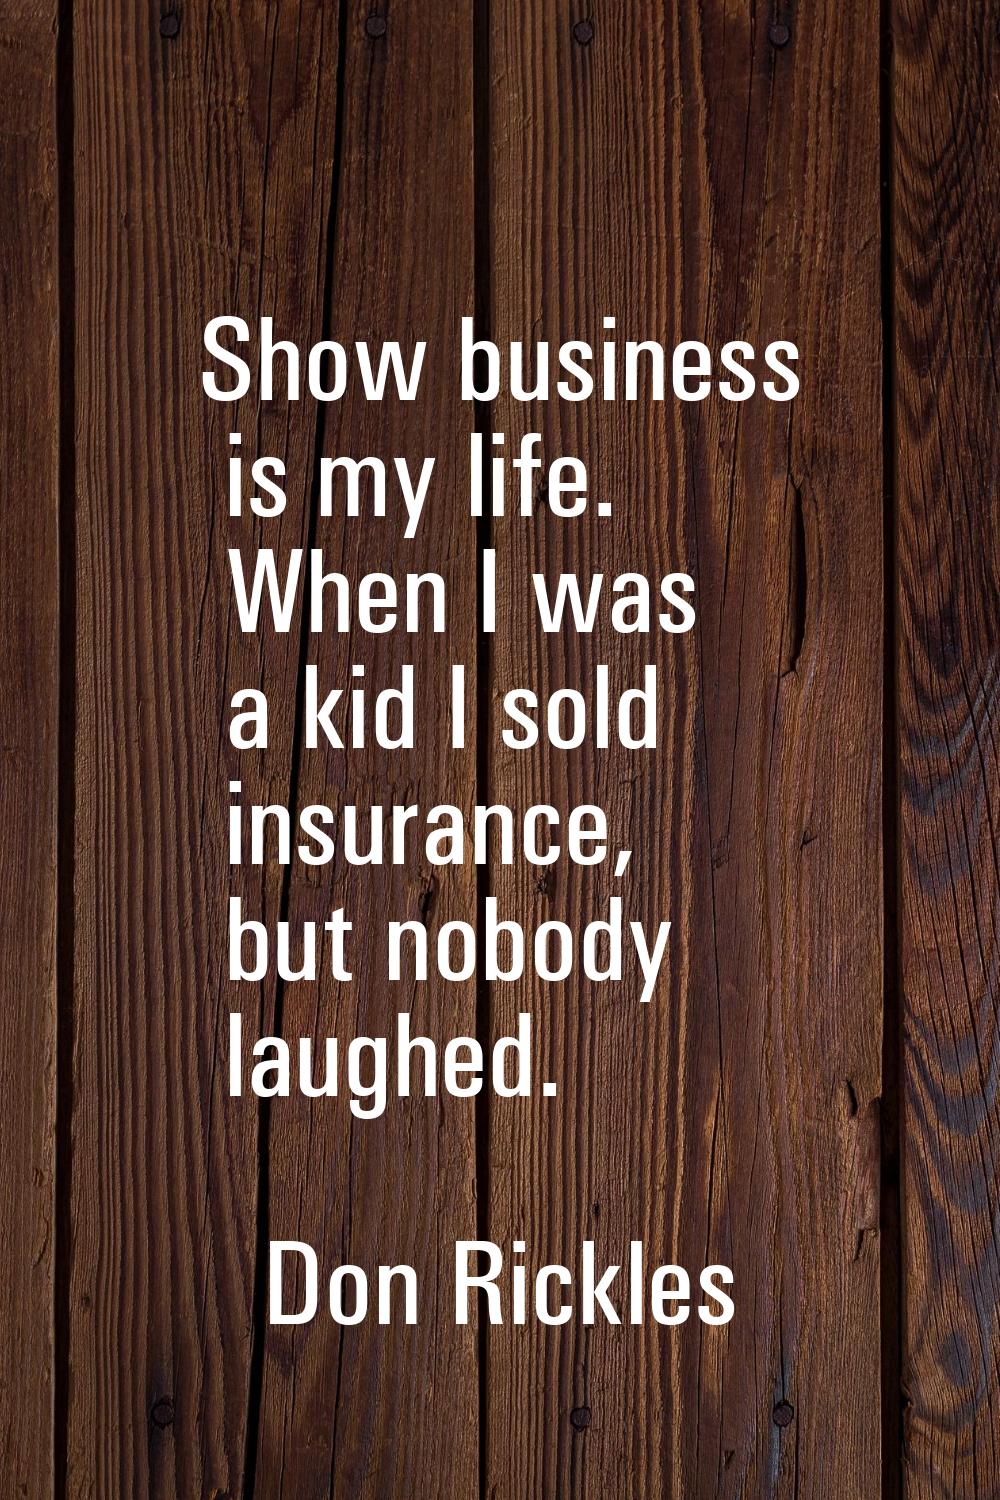 Show business is my life. When I was a kid I sold insurance, but nobody laughed.